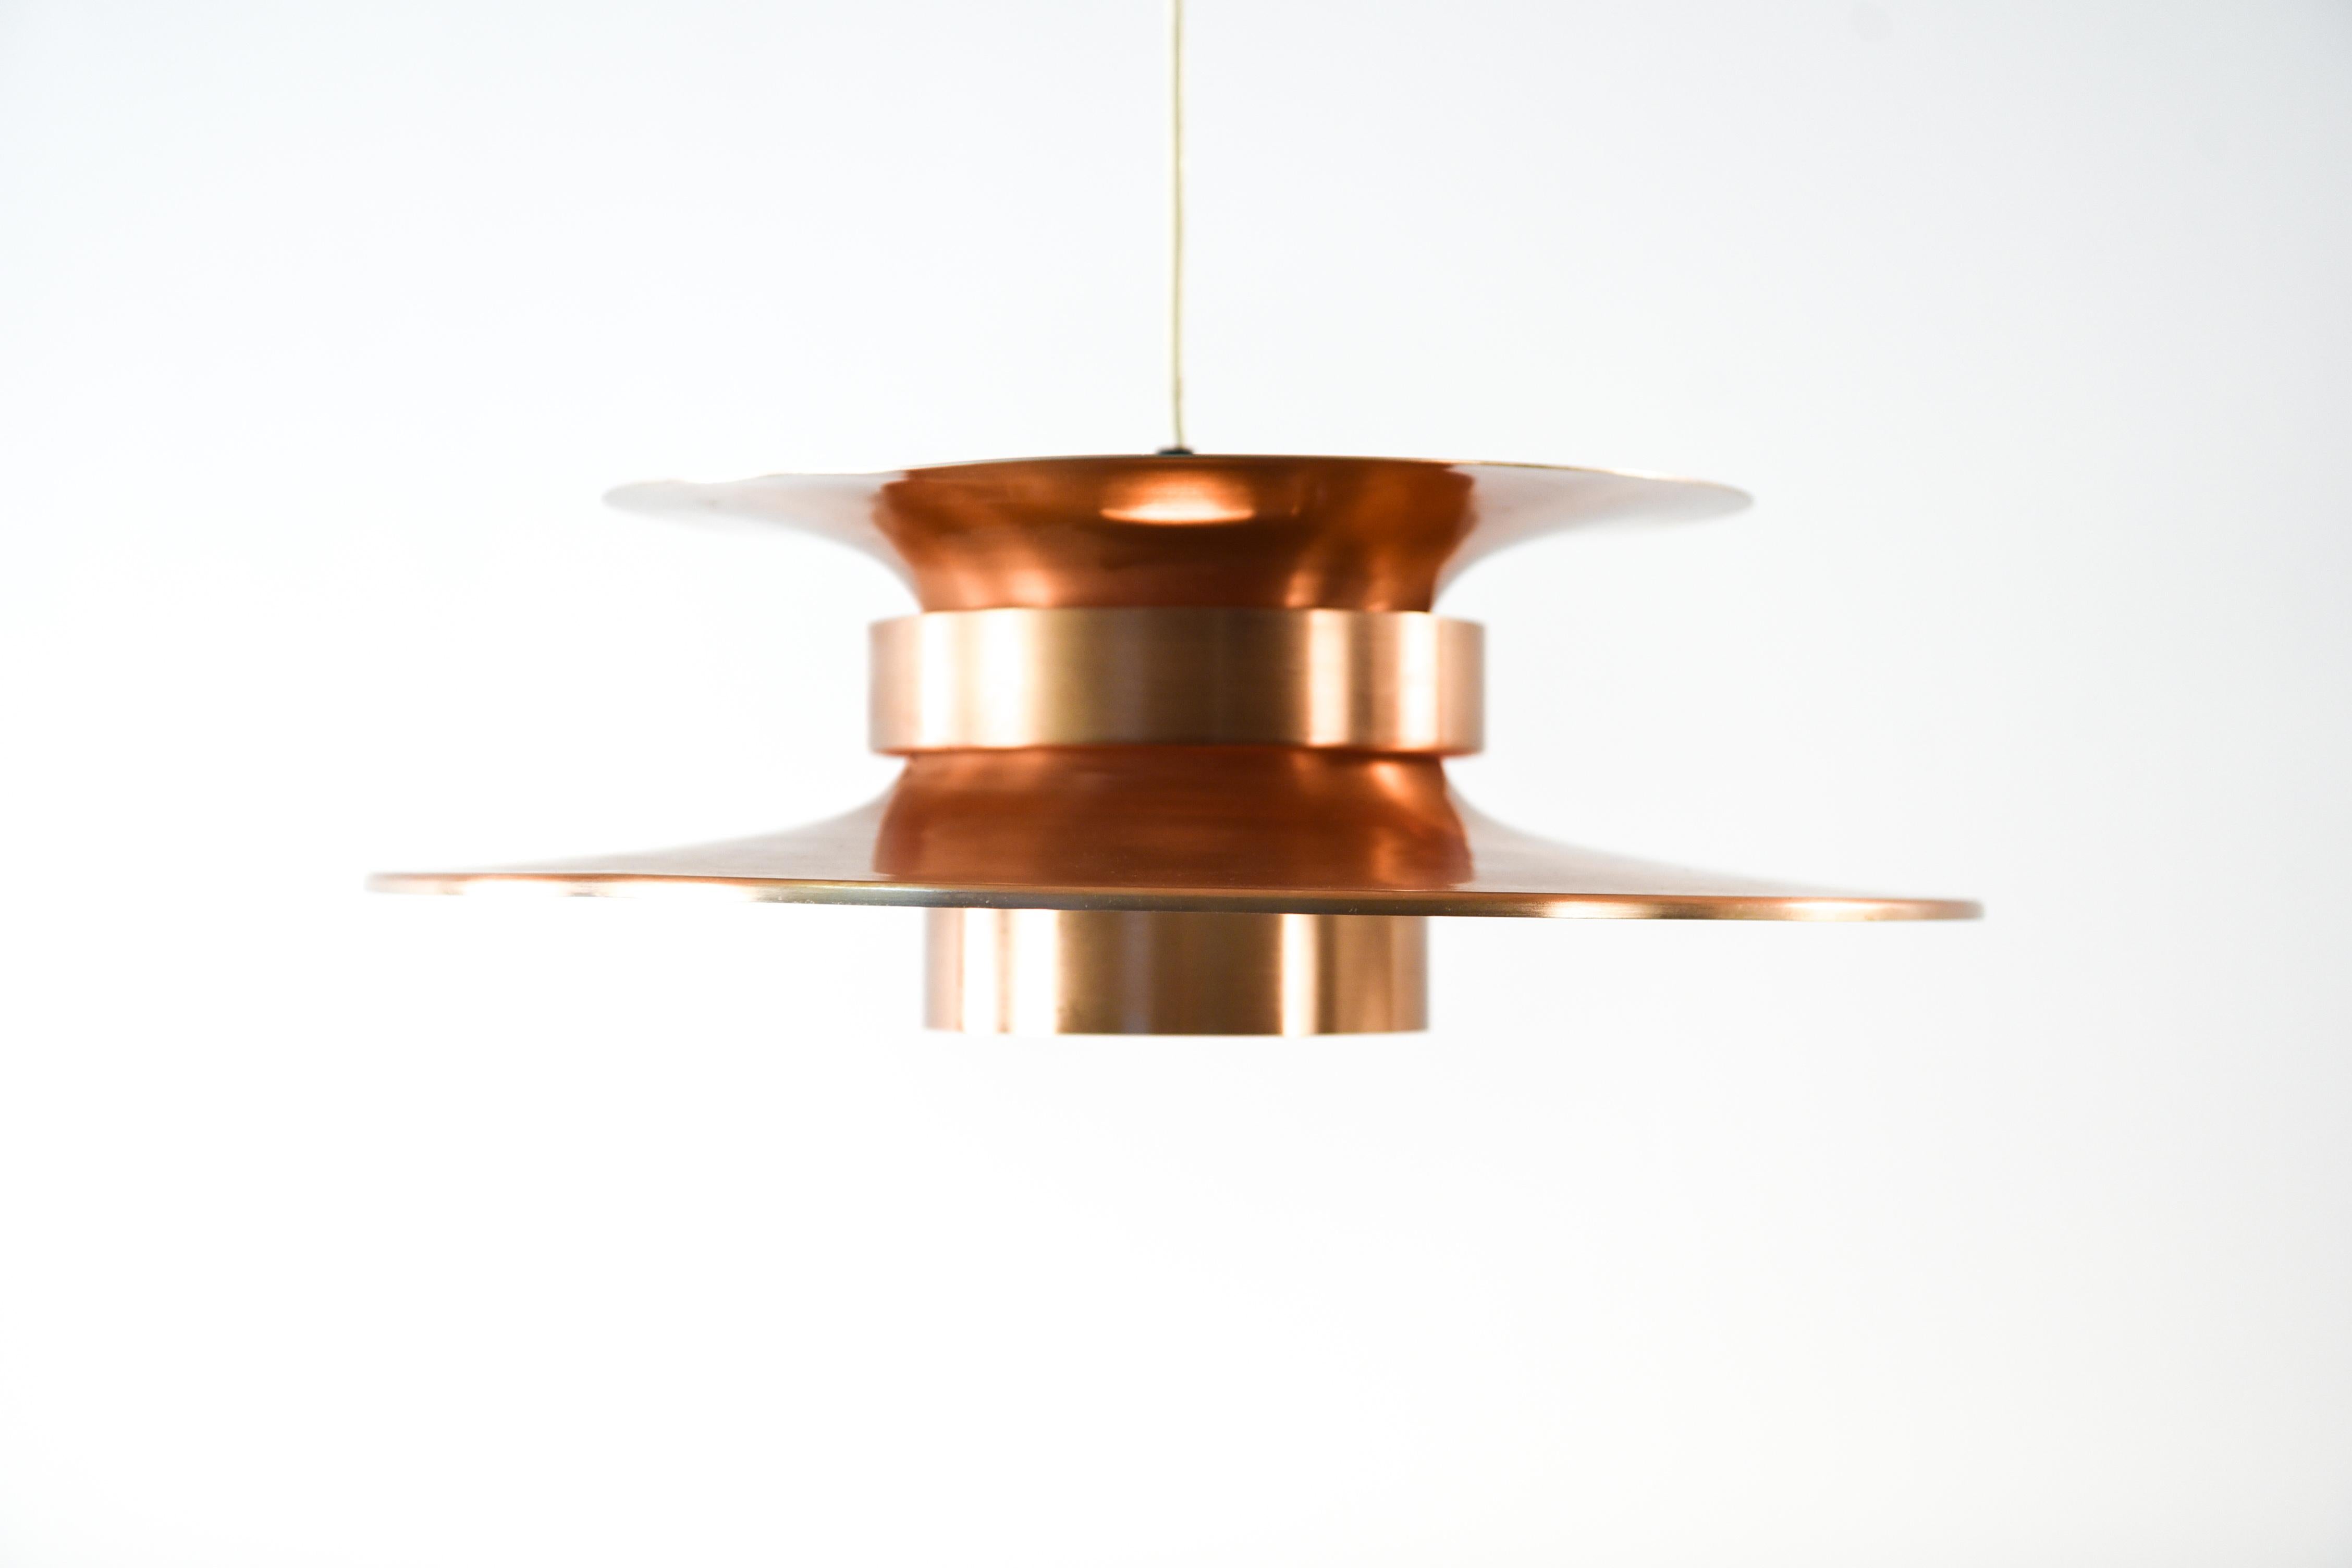 This Danish midcentury pendant light is a timeless shape that has retained its appeal through the ages. This chandelier's warm copper tone augments its interest while adding a sleek metallic element.